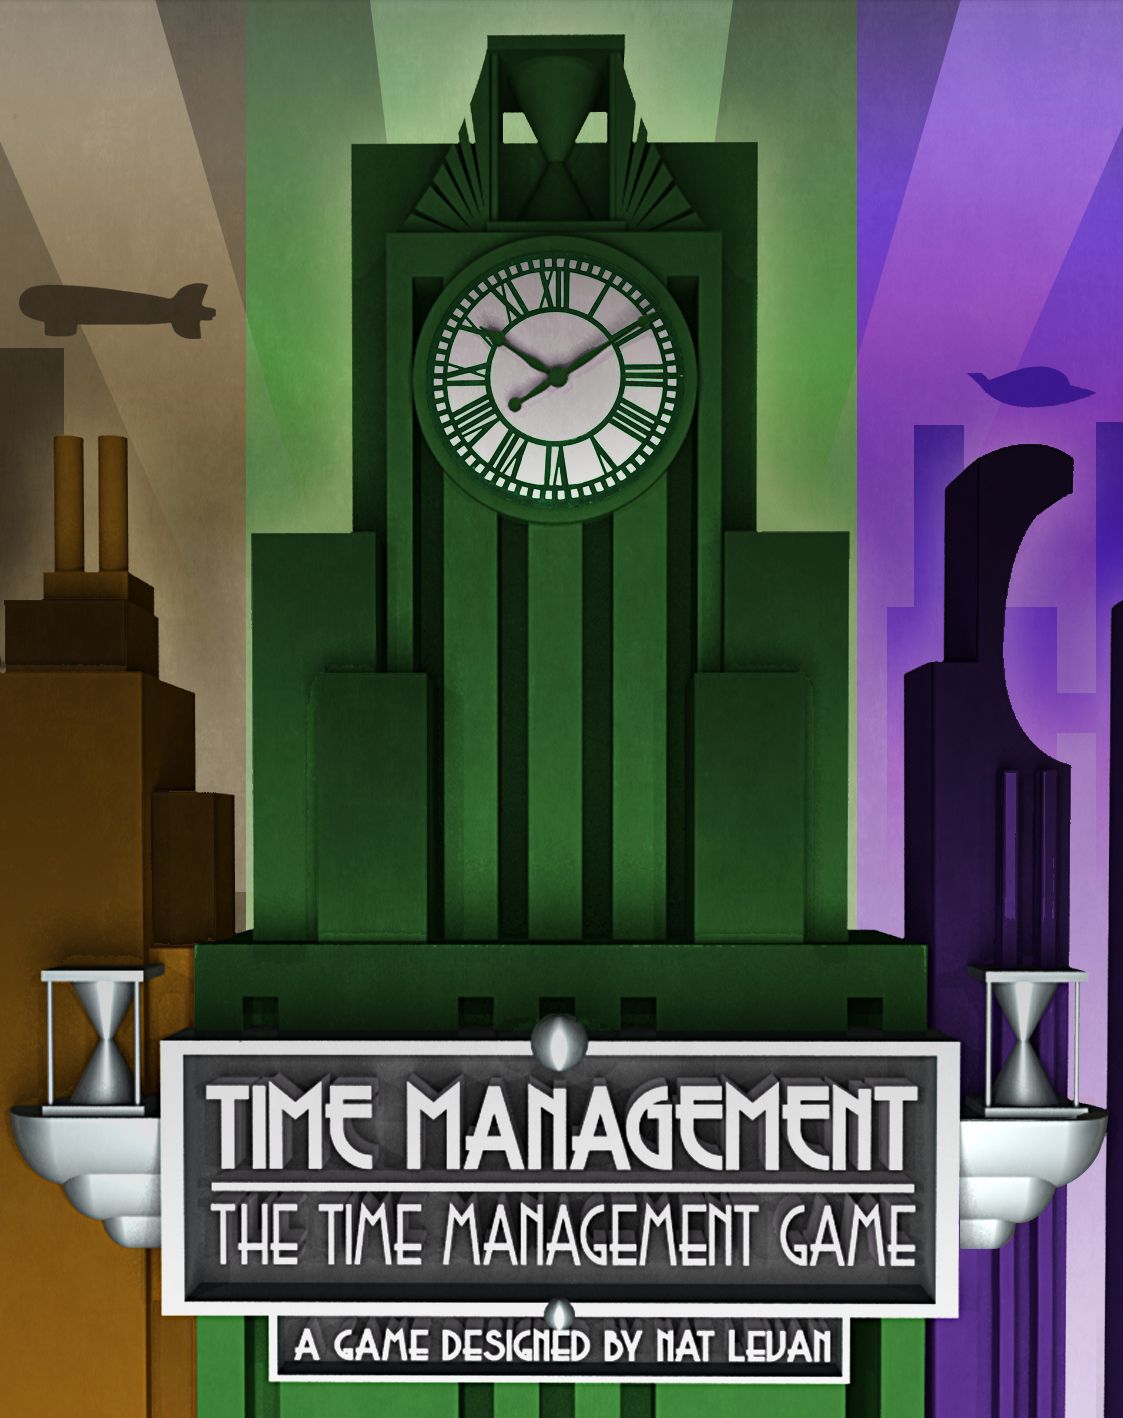 time management games free download full version for pc no time limit